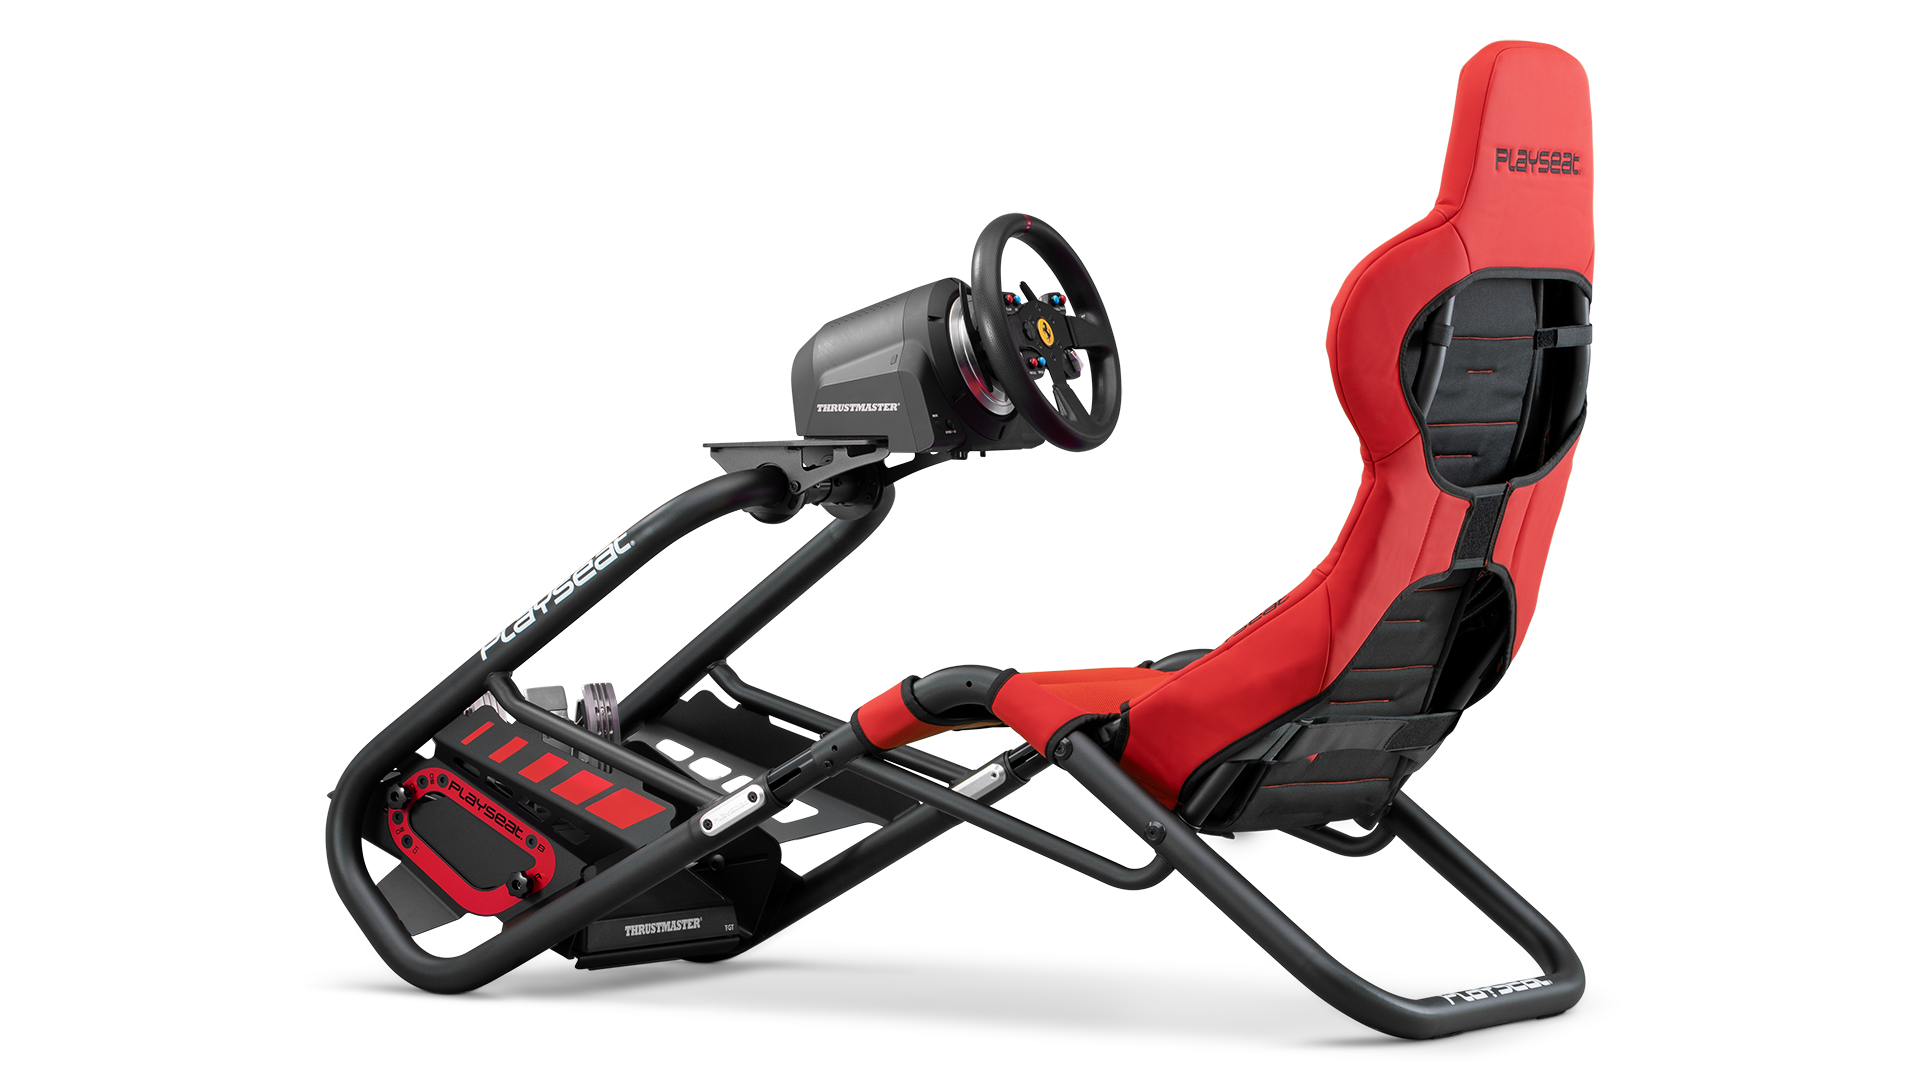 playseat-trophy-red-direct-drive-simulator-back-angle-view-thrustmaster-1920x1080-4.png